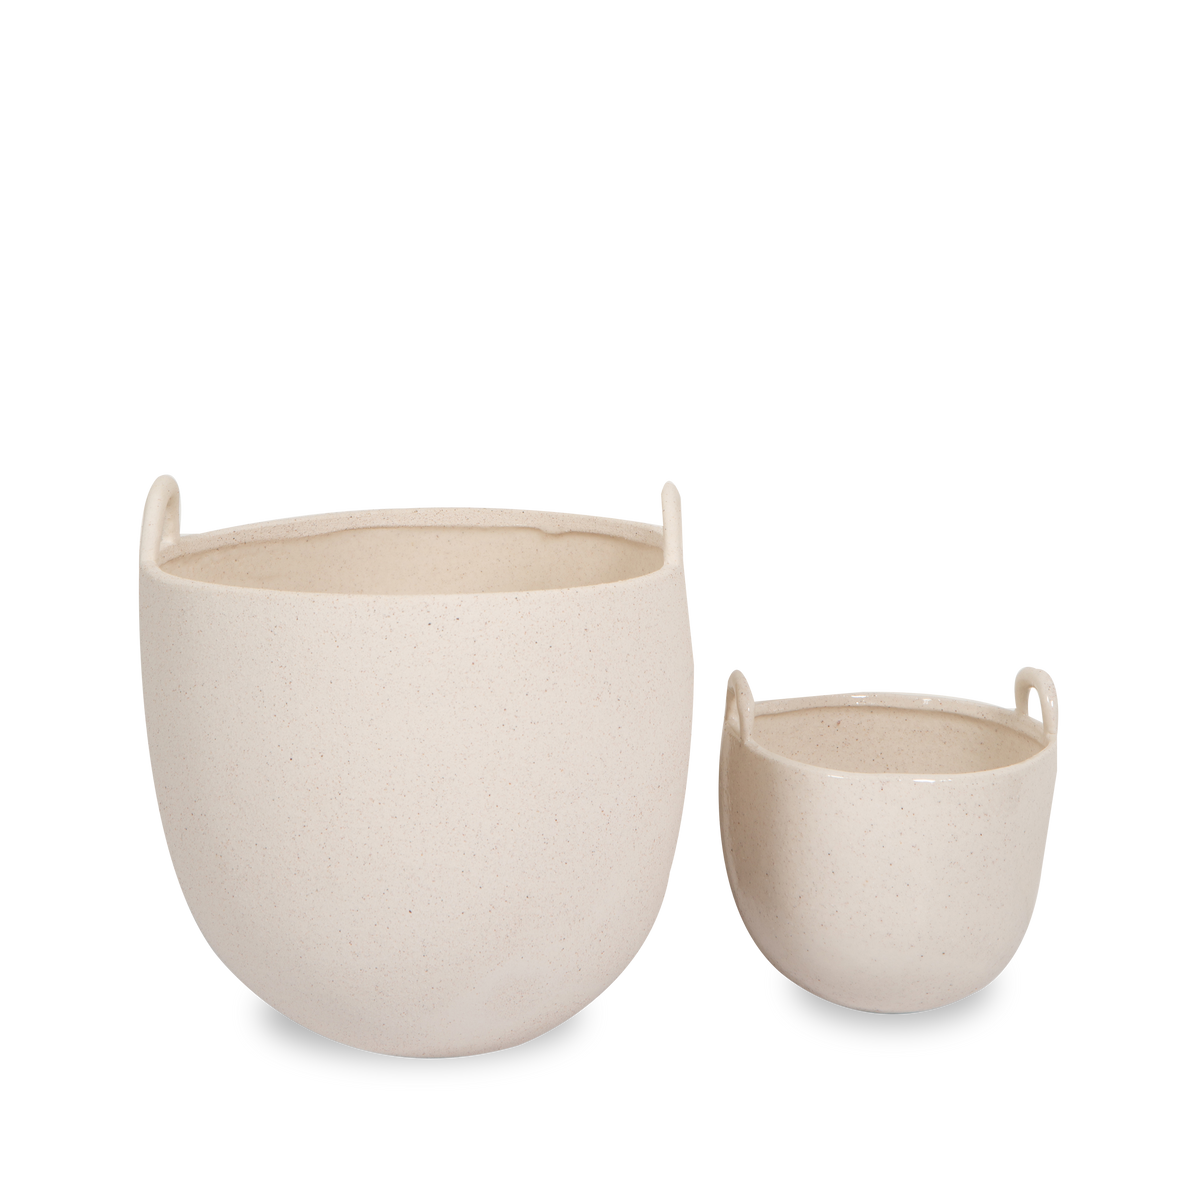 Made with a distinct sort of stoneware with a grainy, raw texture, the Speckle pot presents an organic, handmade look and feel.